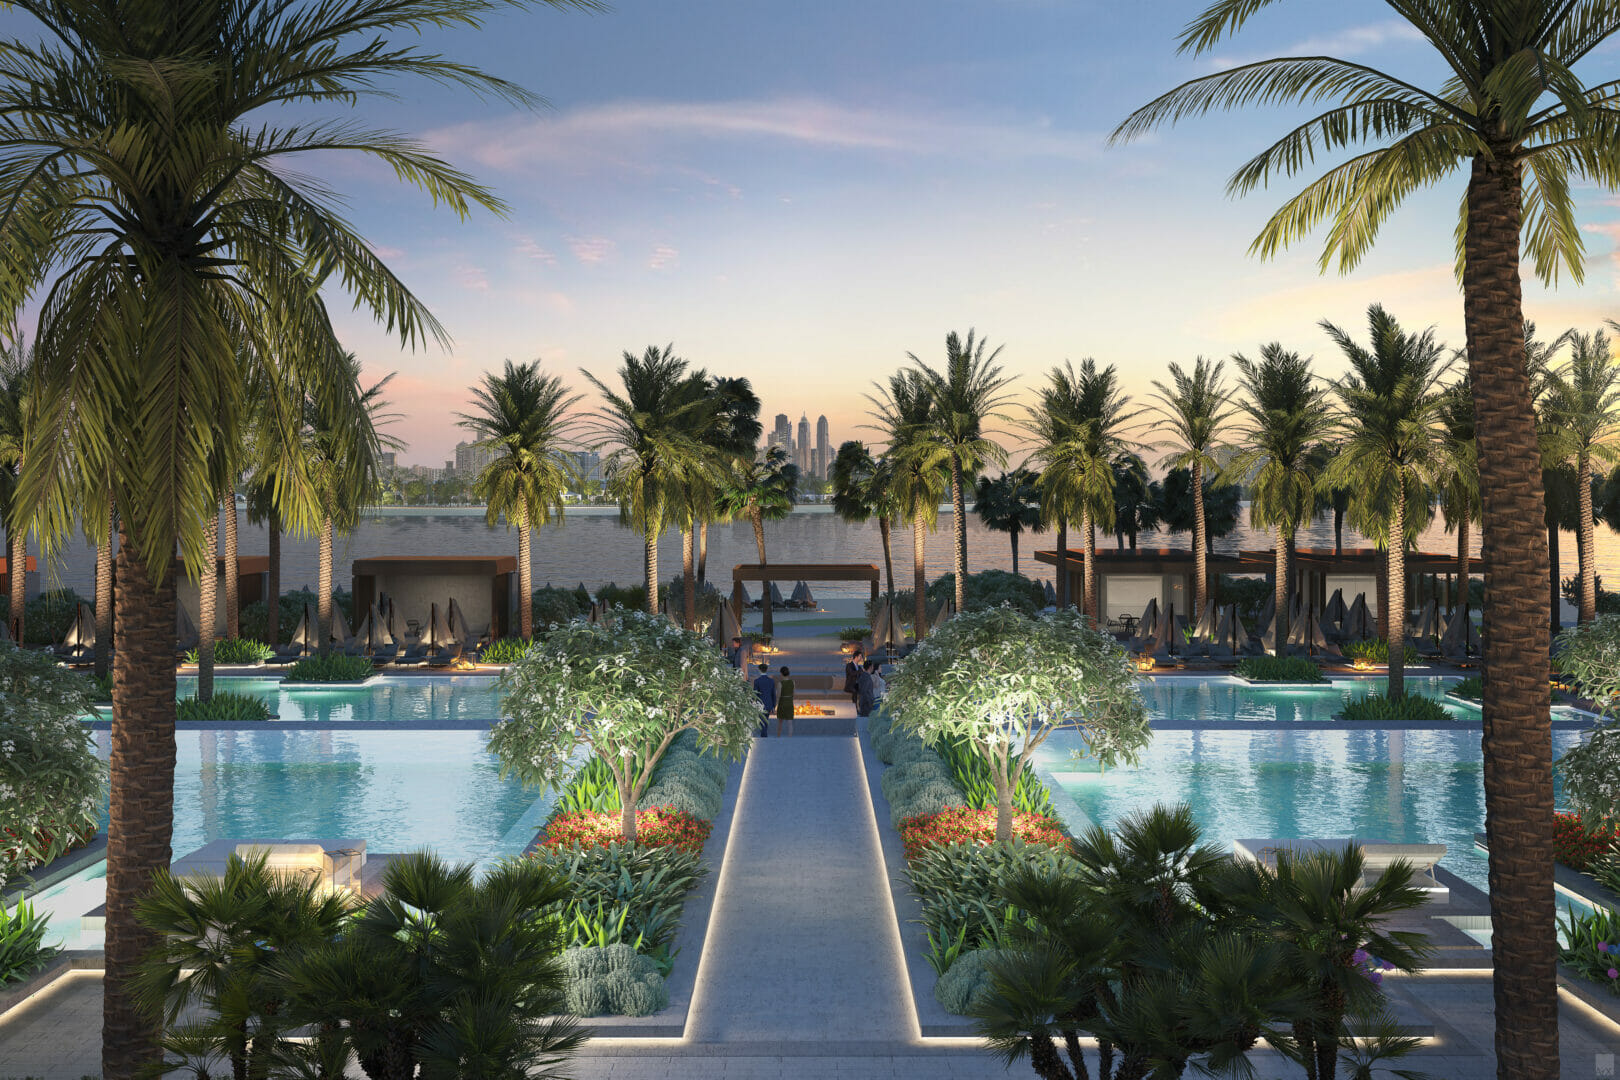 NOBU HOSPITALITY’S DEBUT POOL AND BEACH CLUB, NOBU BY THE BEACH IS SET TO OPEN AT ATLANTIS THE ROYAL IN Q1, 2023